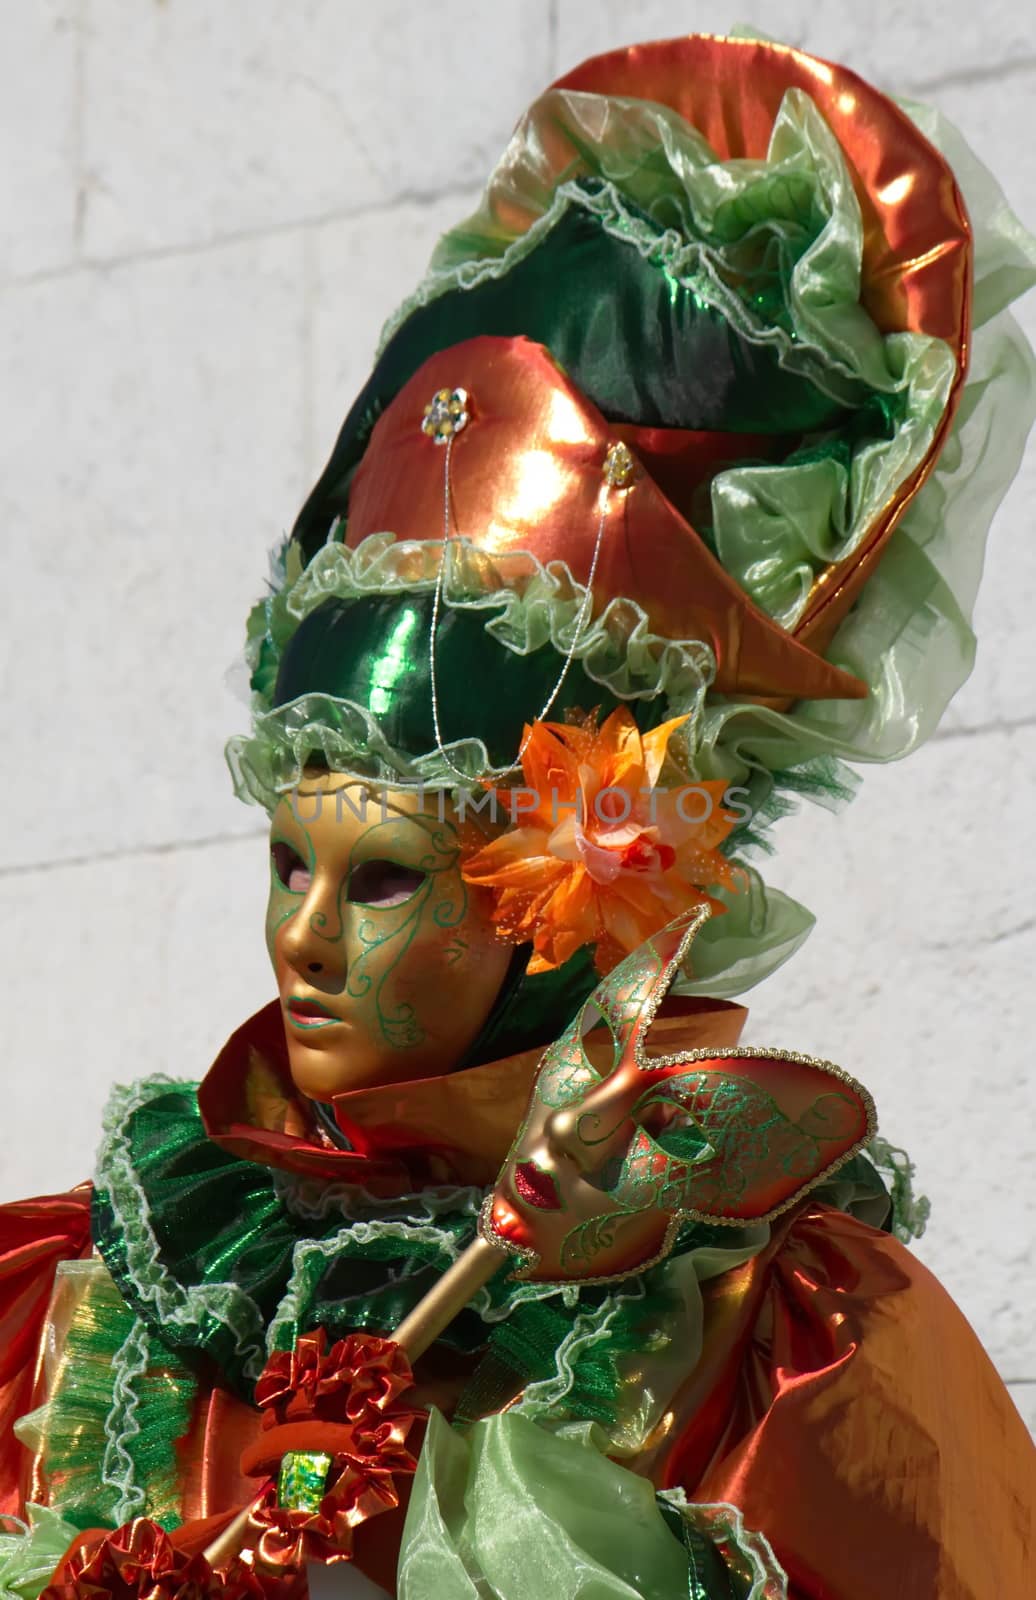 Red and green person with big hat holding a mask in hand at the 2014 Annecy venetian carnival, France